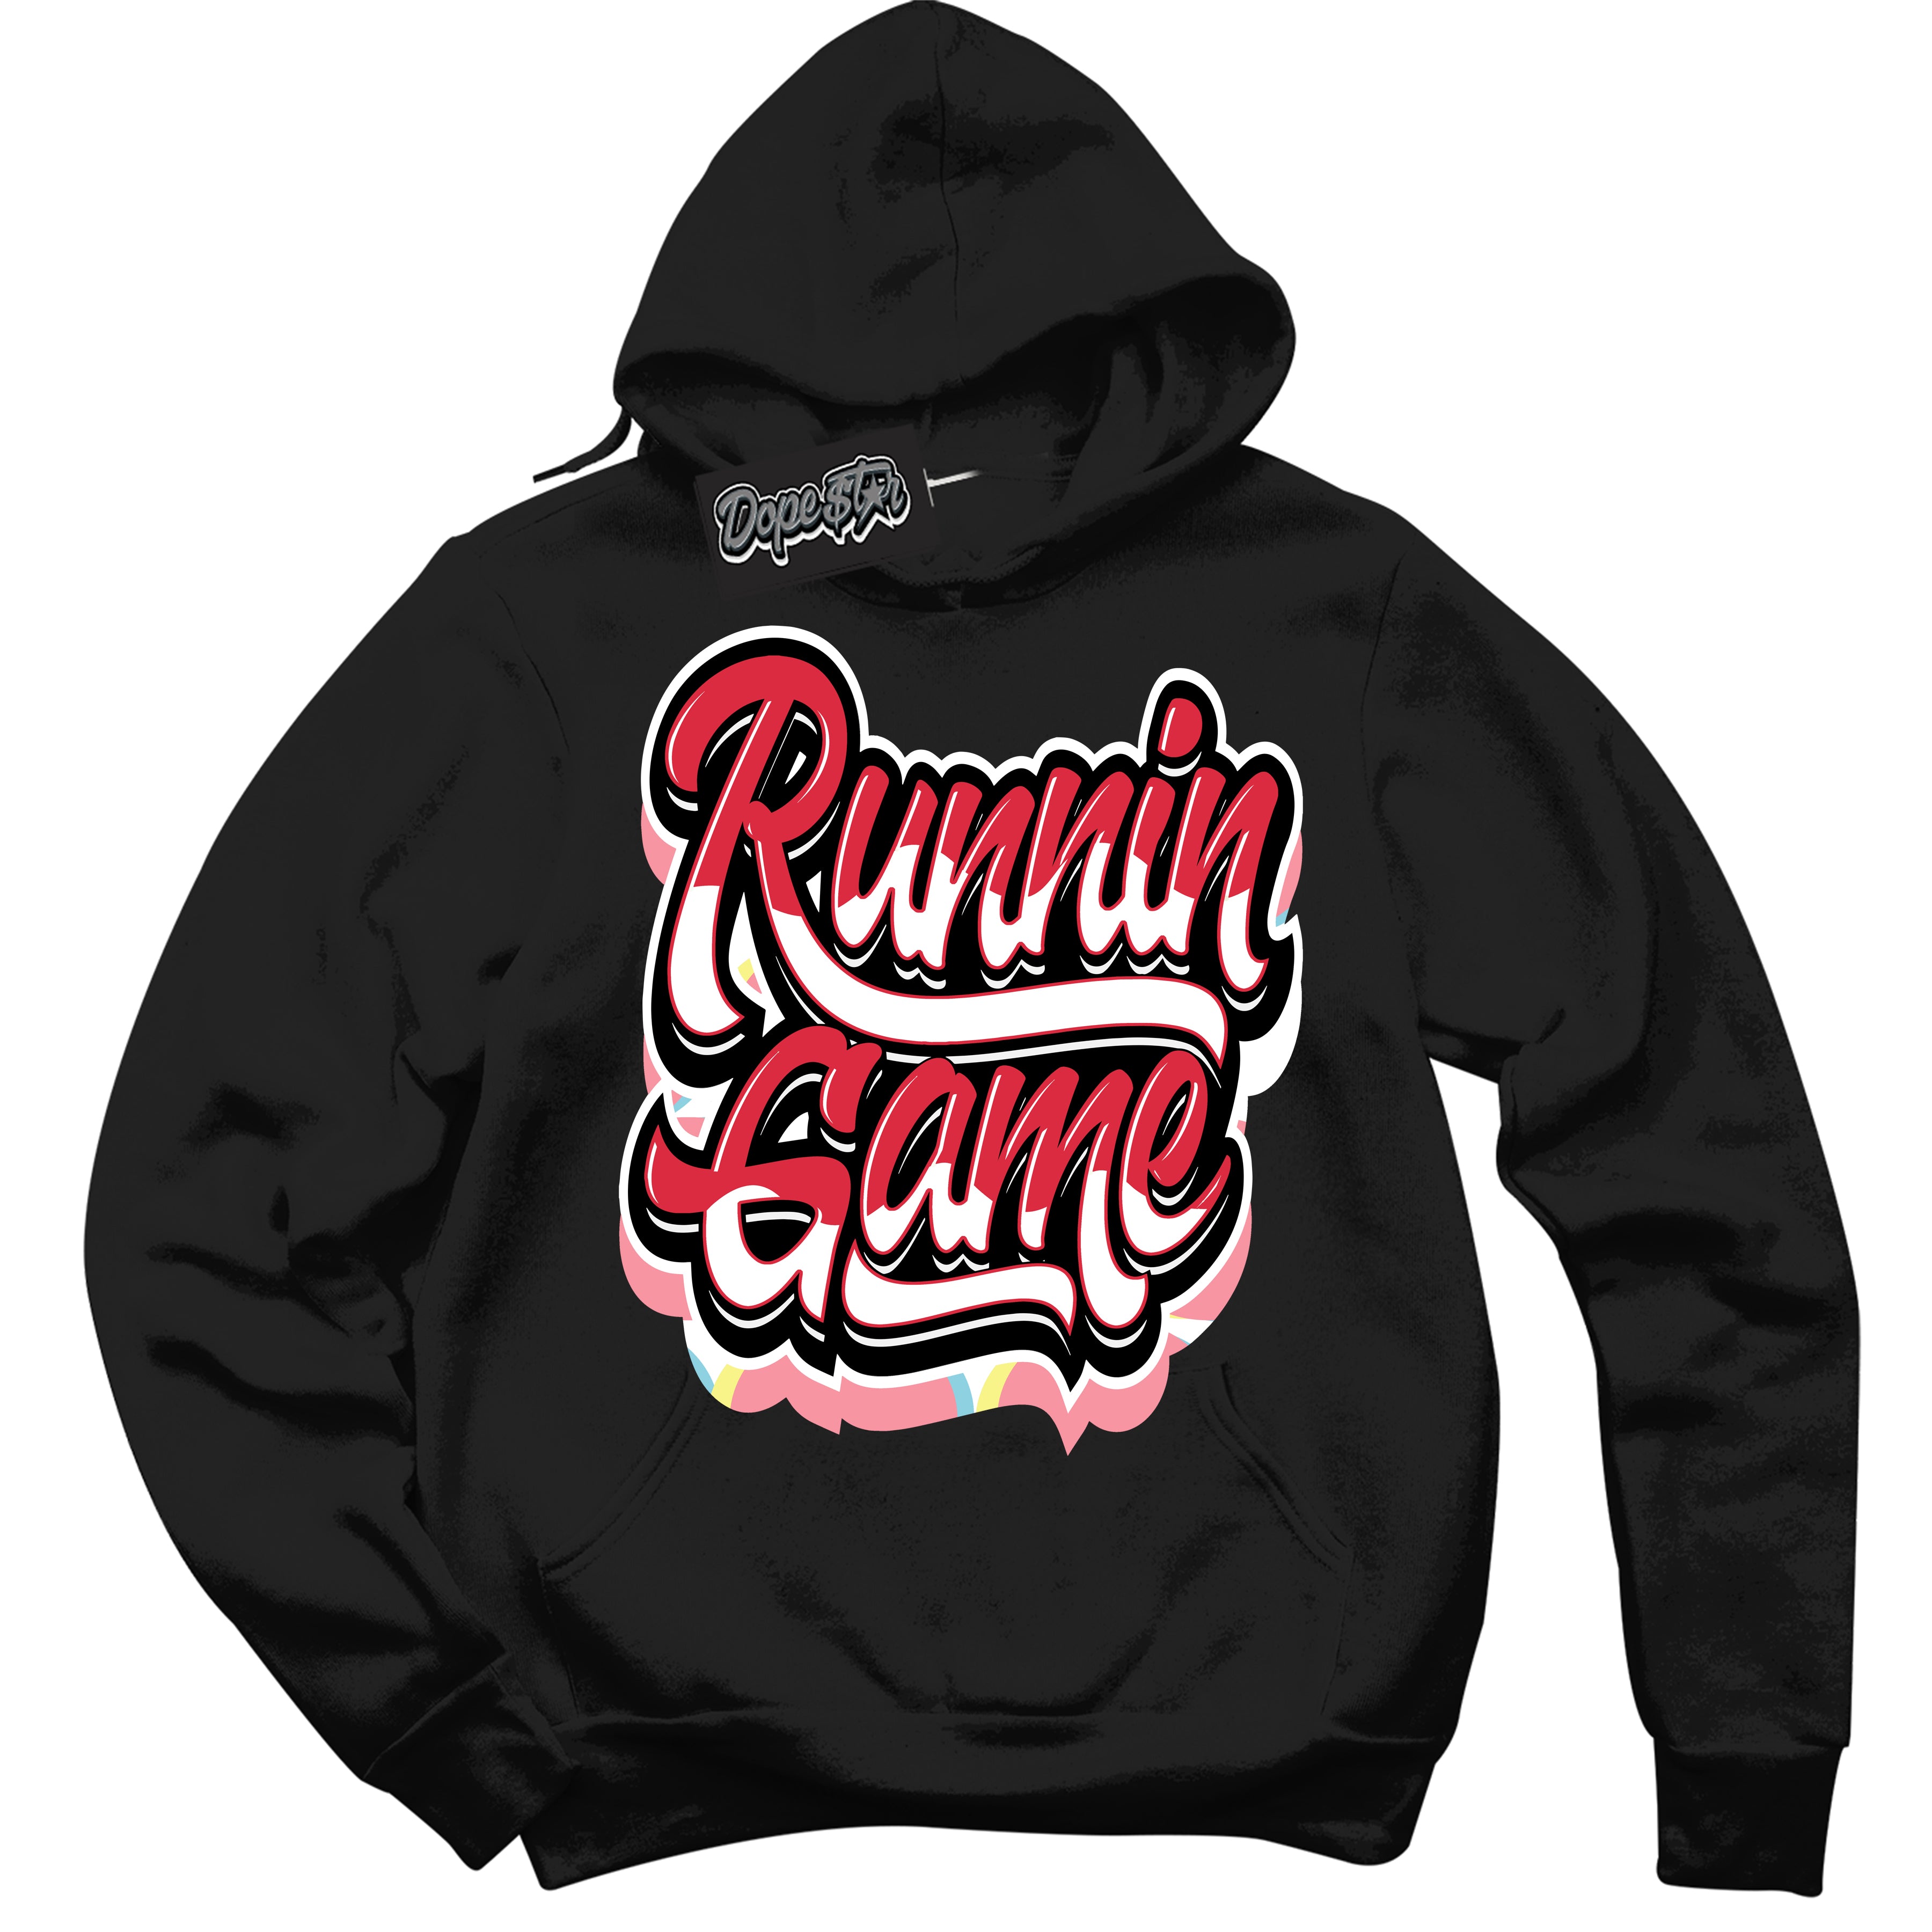 Cool Black Graphic DopeStar Hoodie with “ Running Game “ print, that perfectly matches Spider-Verse 1s sneakers